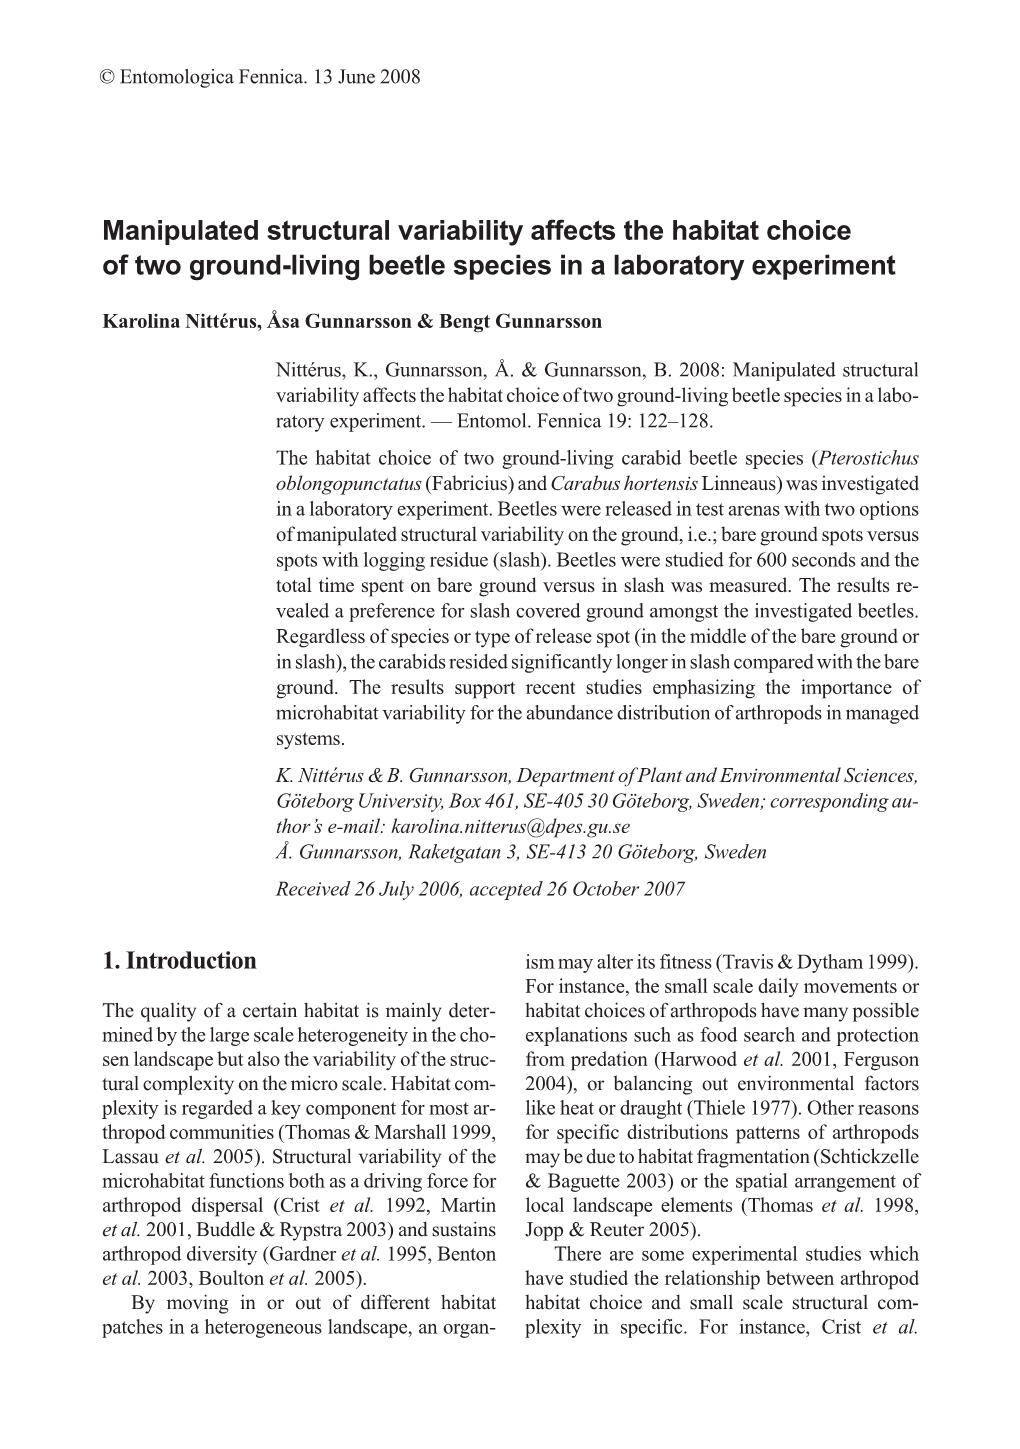 Manipulated Structural Variability Affects the Habitat Choice of Two Ground-Living Beetle Species in a Laboratory Experiment